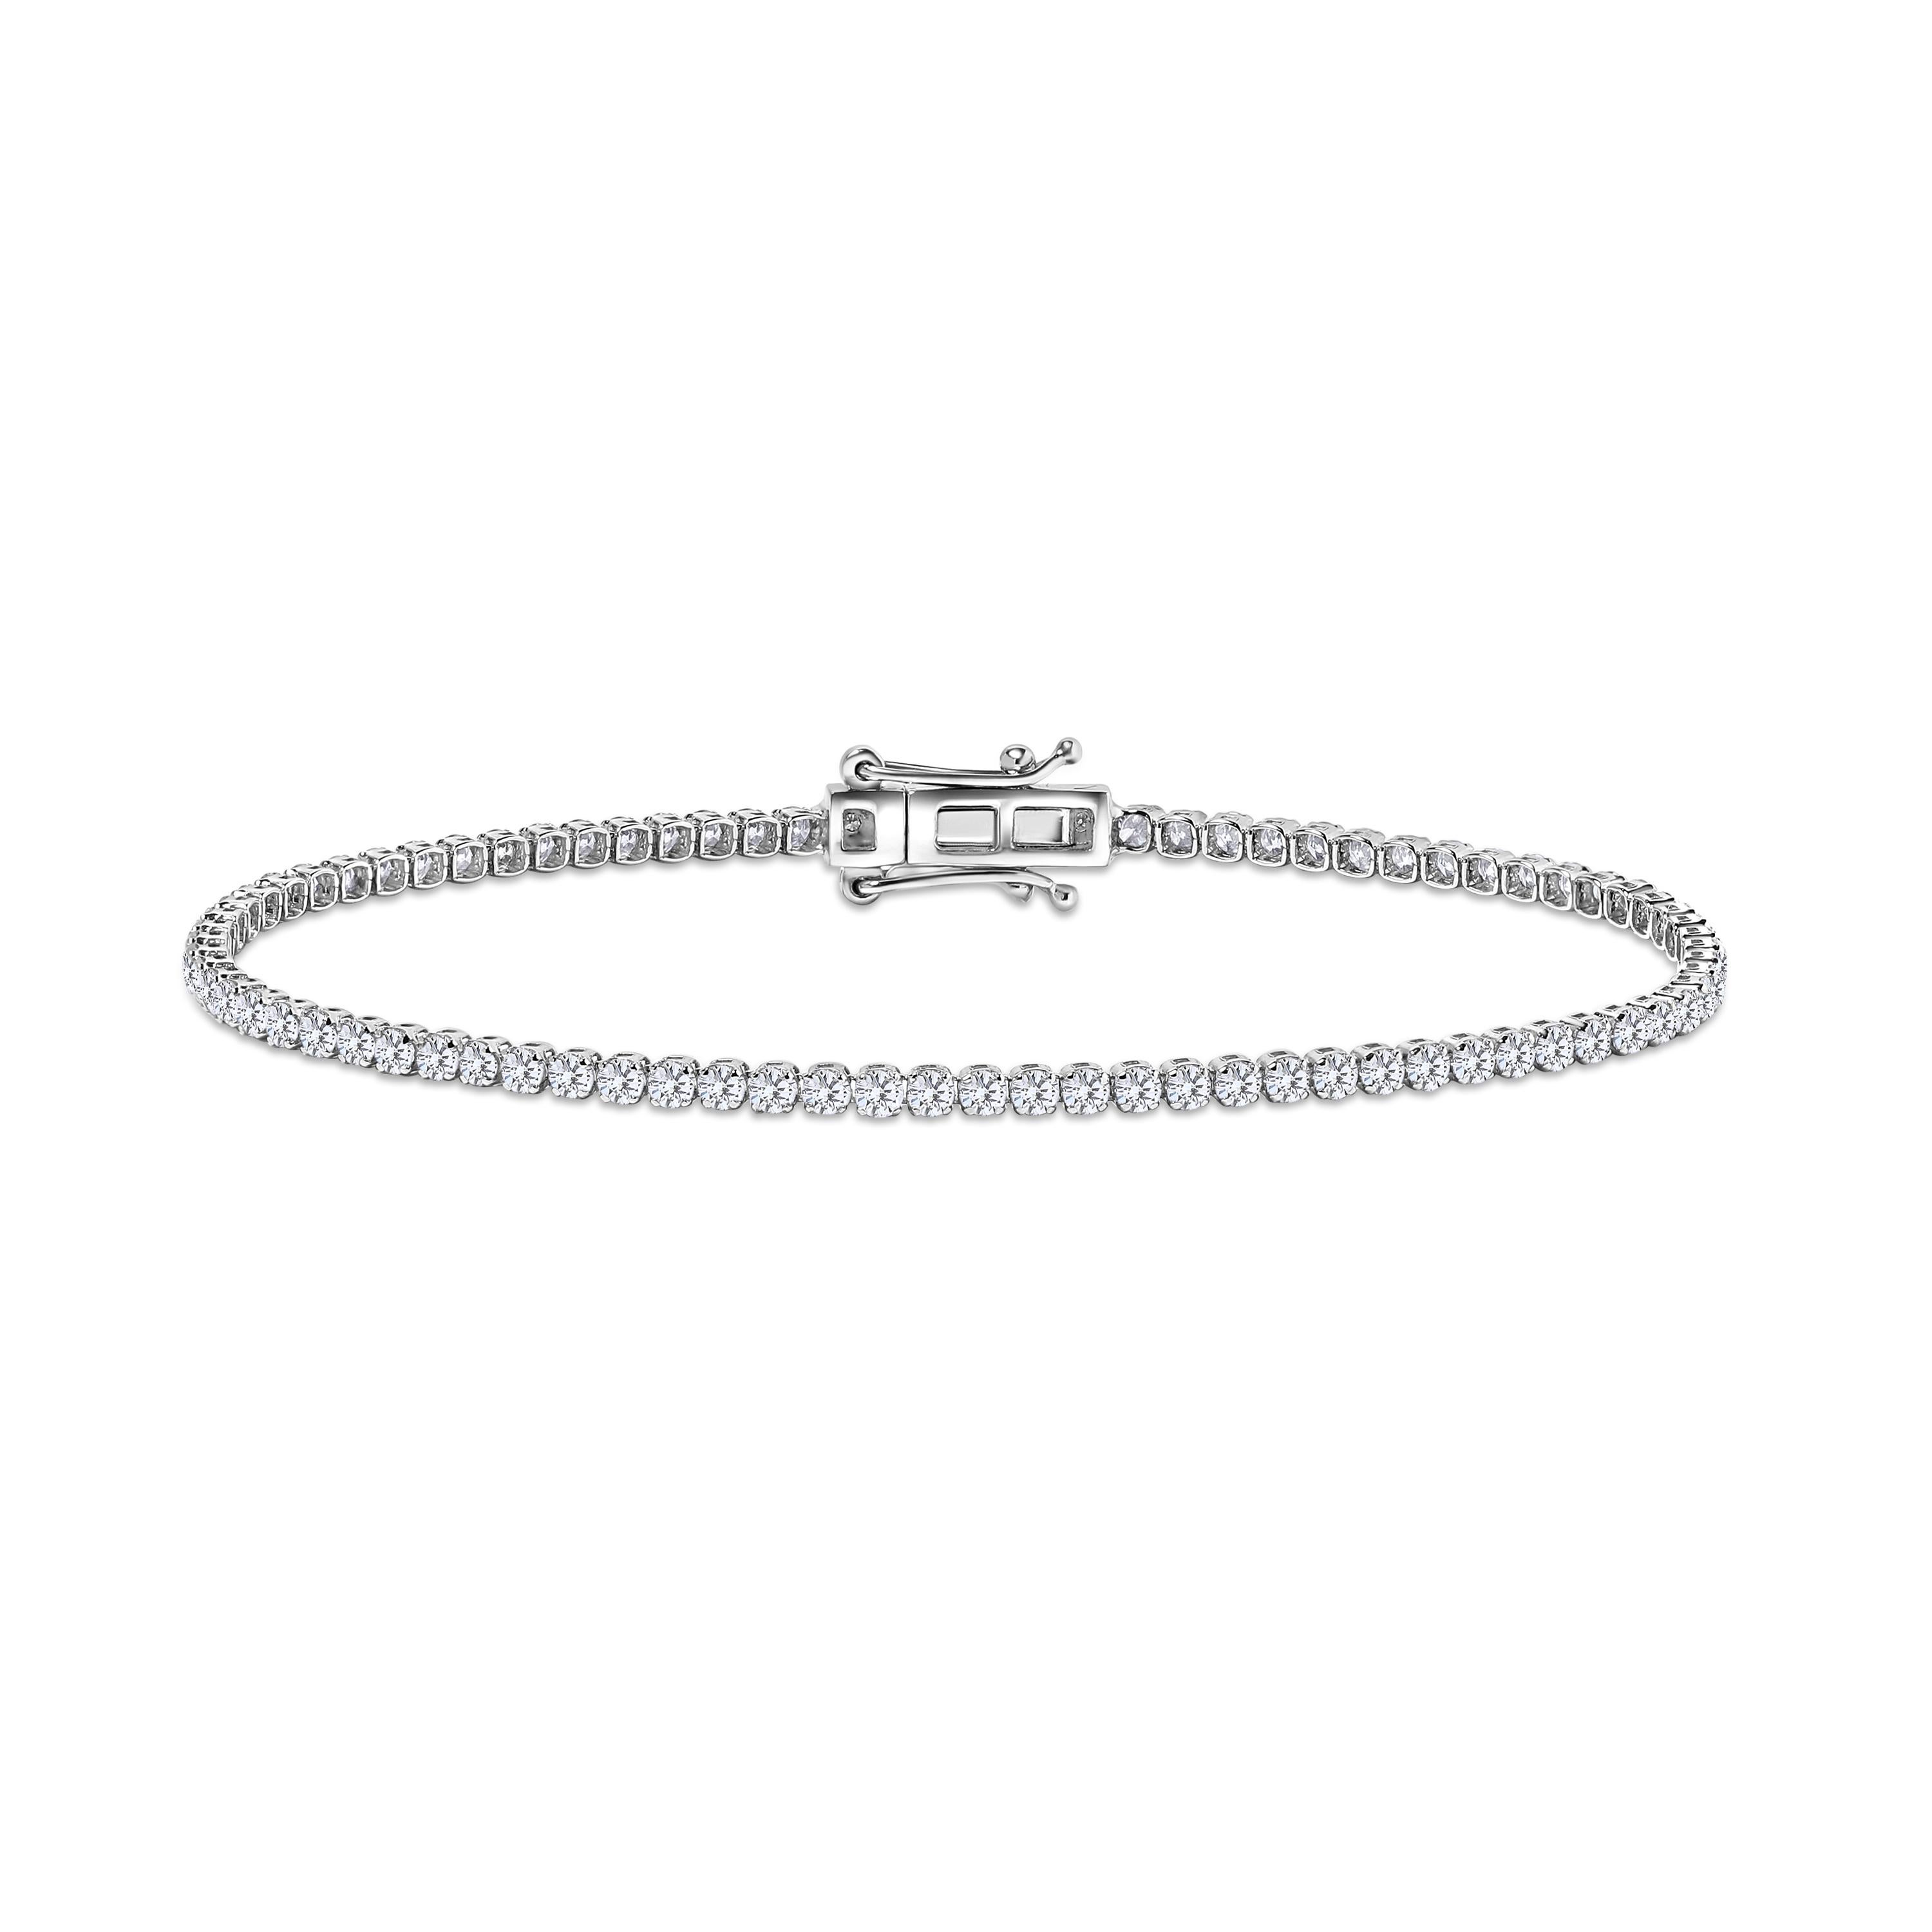 This ULTRA LIGHT WEIGHT TENNIS BRACELET features beautifully matched round natural diamonds minimum T.W. 1.7cts. Elegance for every moment. The length of bracelet is 7 inches.

DIAMOND DETAILS
Natural, Ethically sourced & Conflict free.
DIAMOND